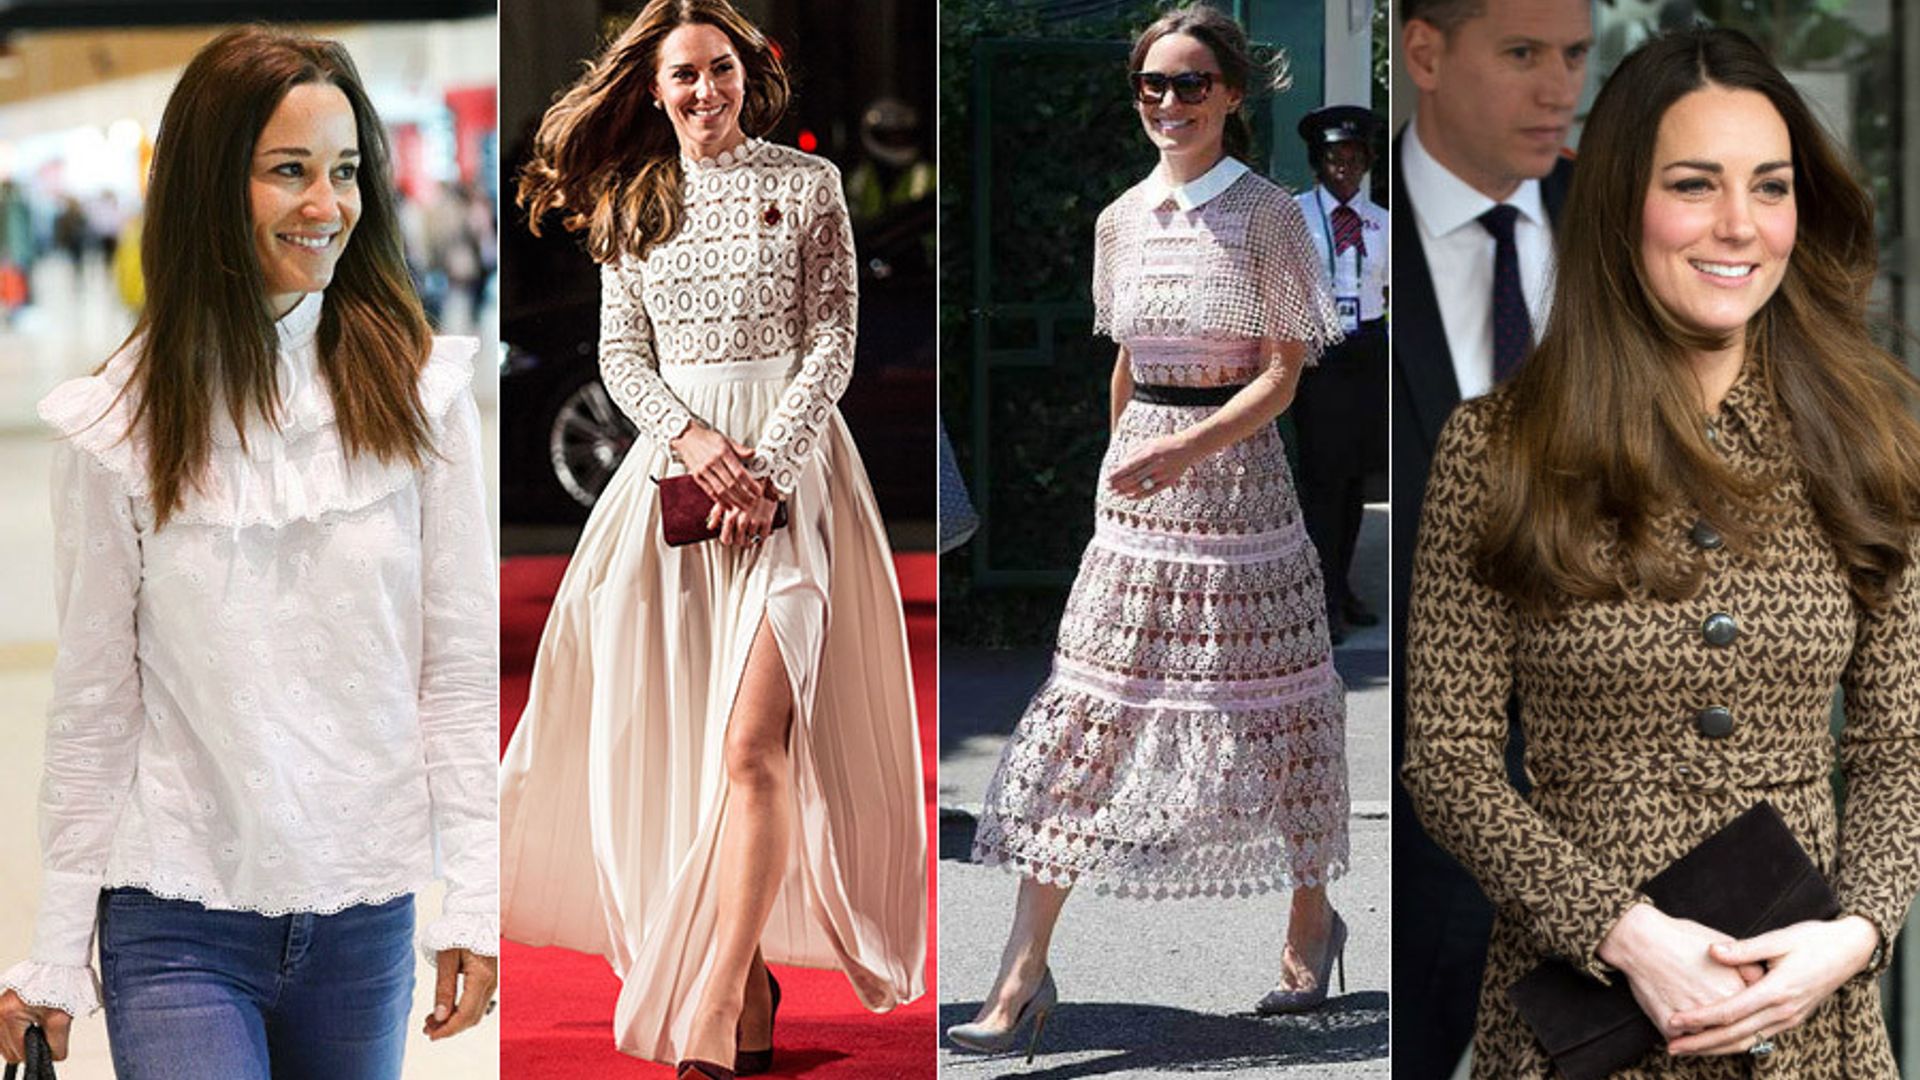 17 designers the Duchess of Cambridge and Pippa Middleton both love